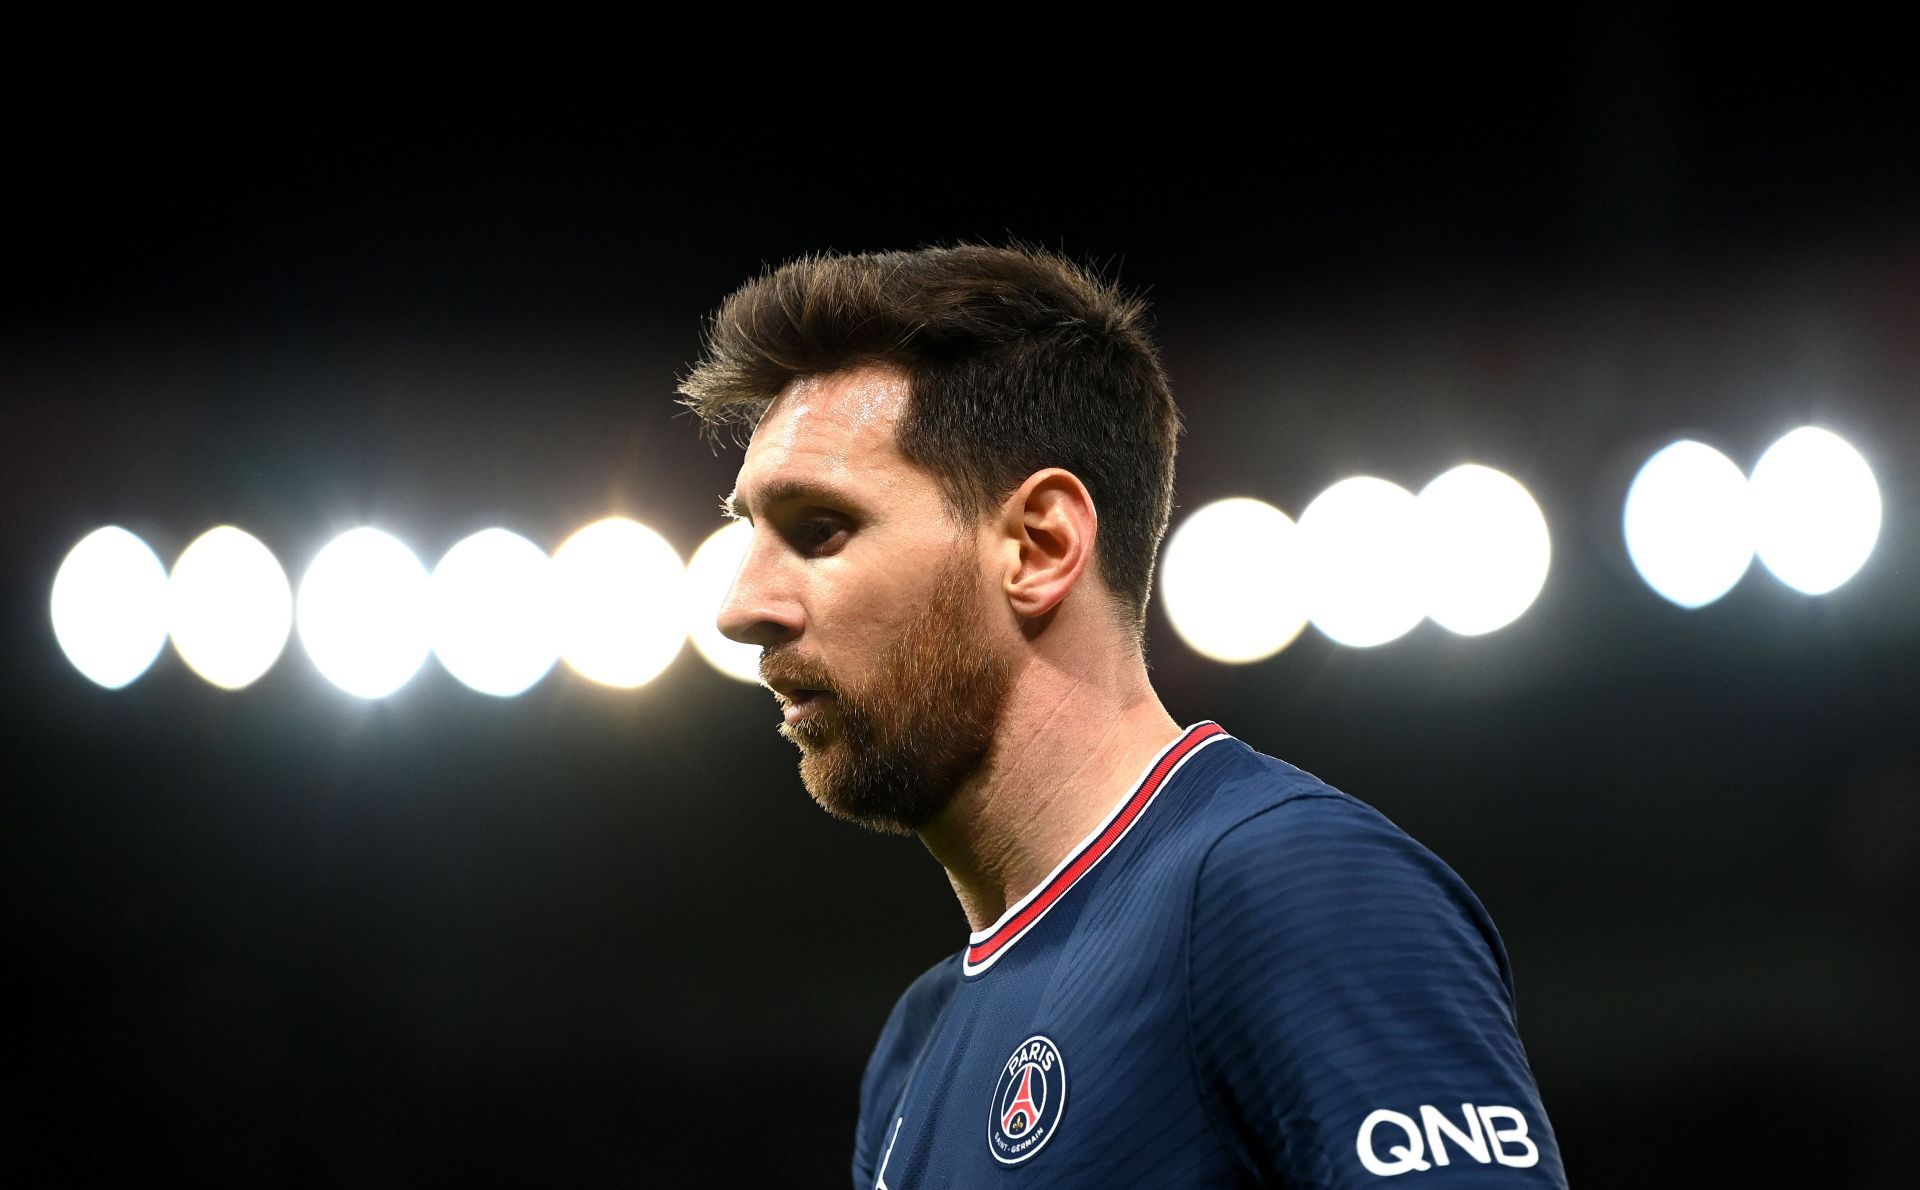  Lionel Messi has played five games for PSG so far this season